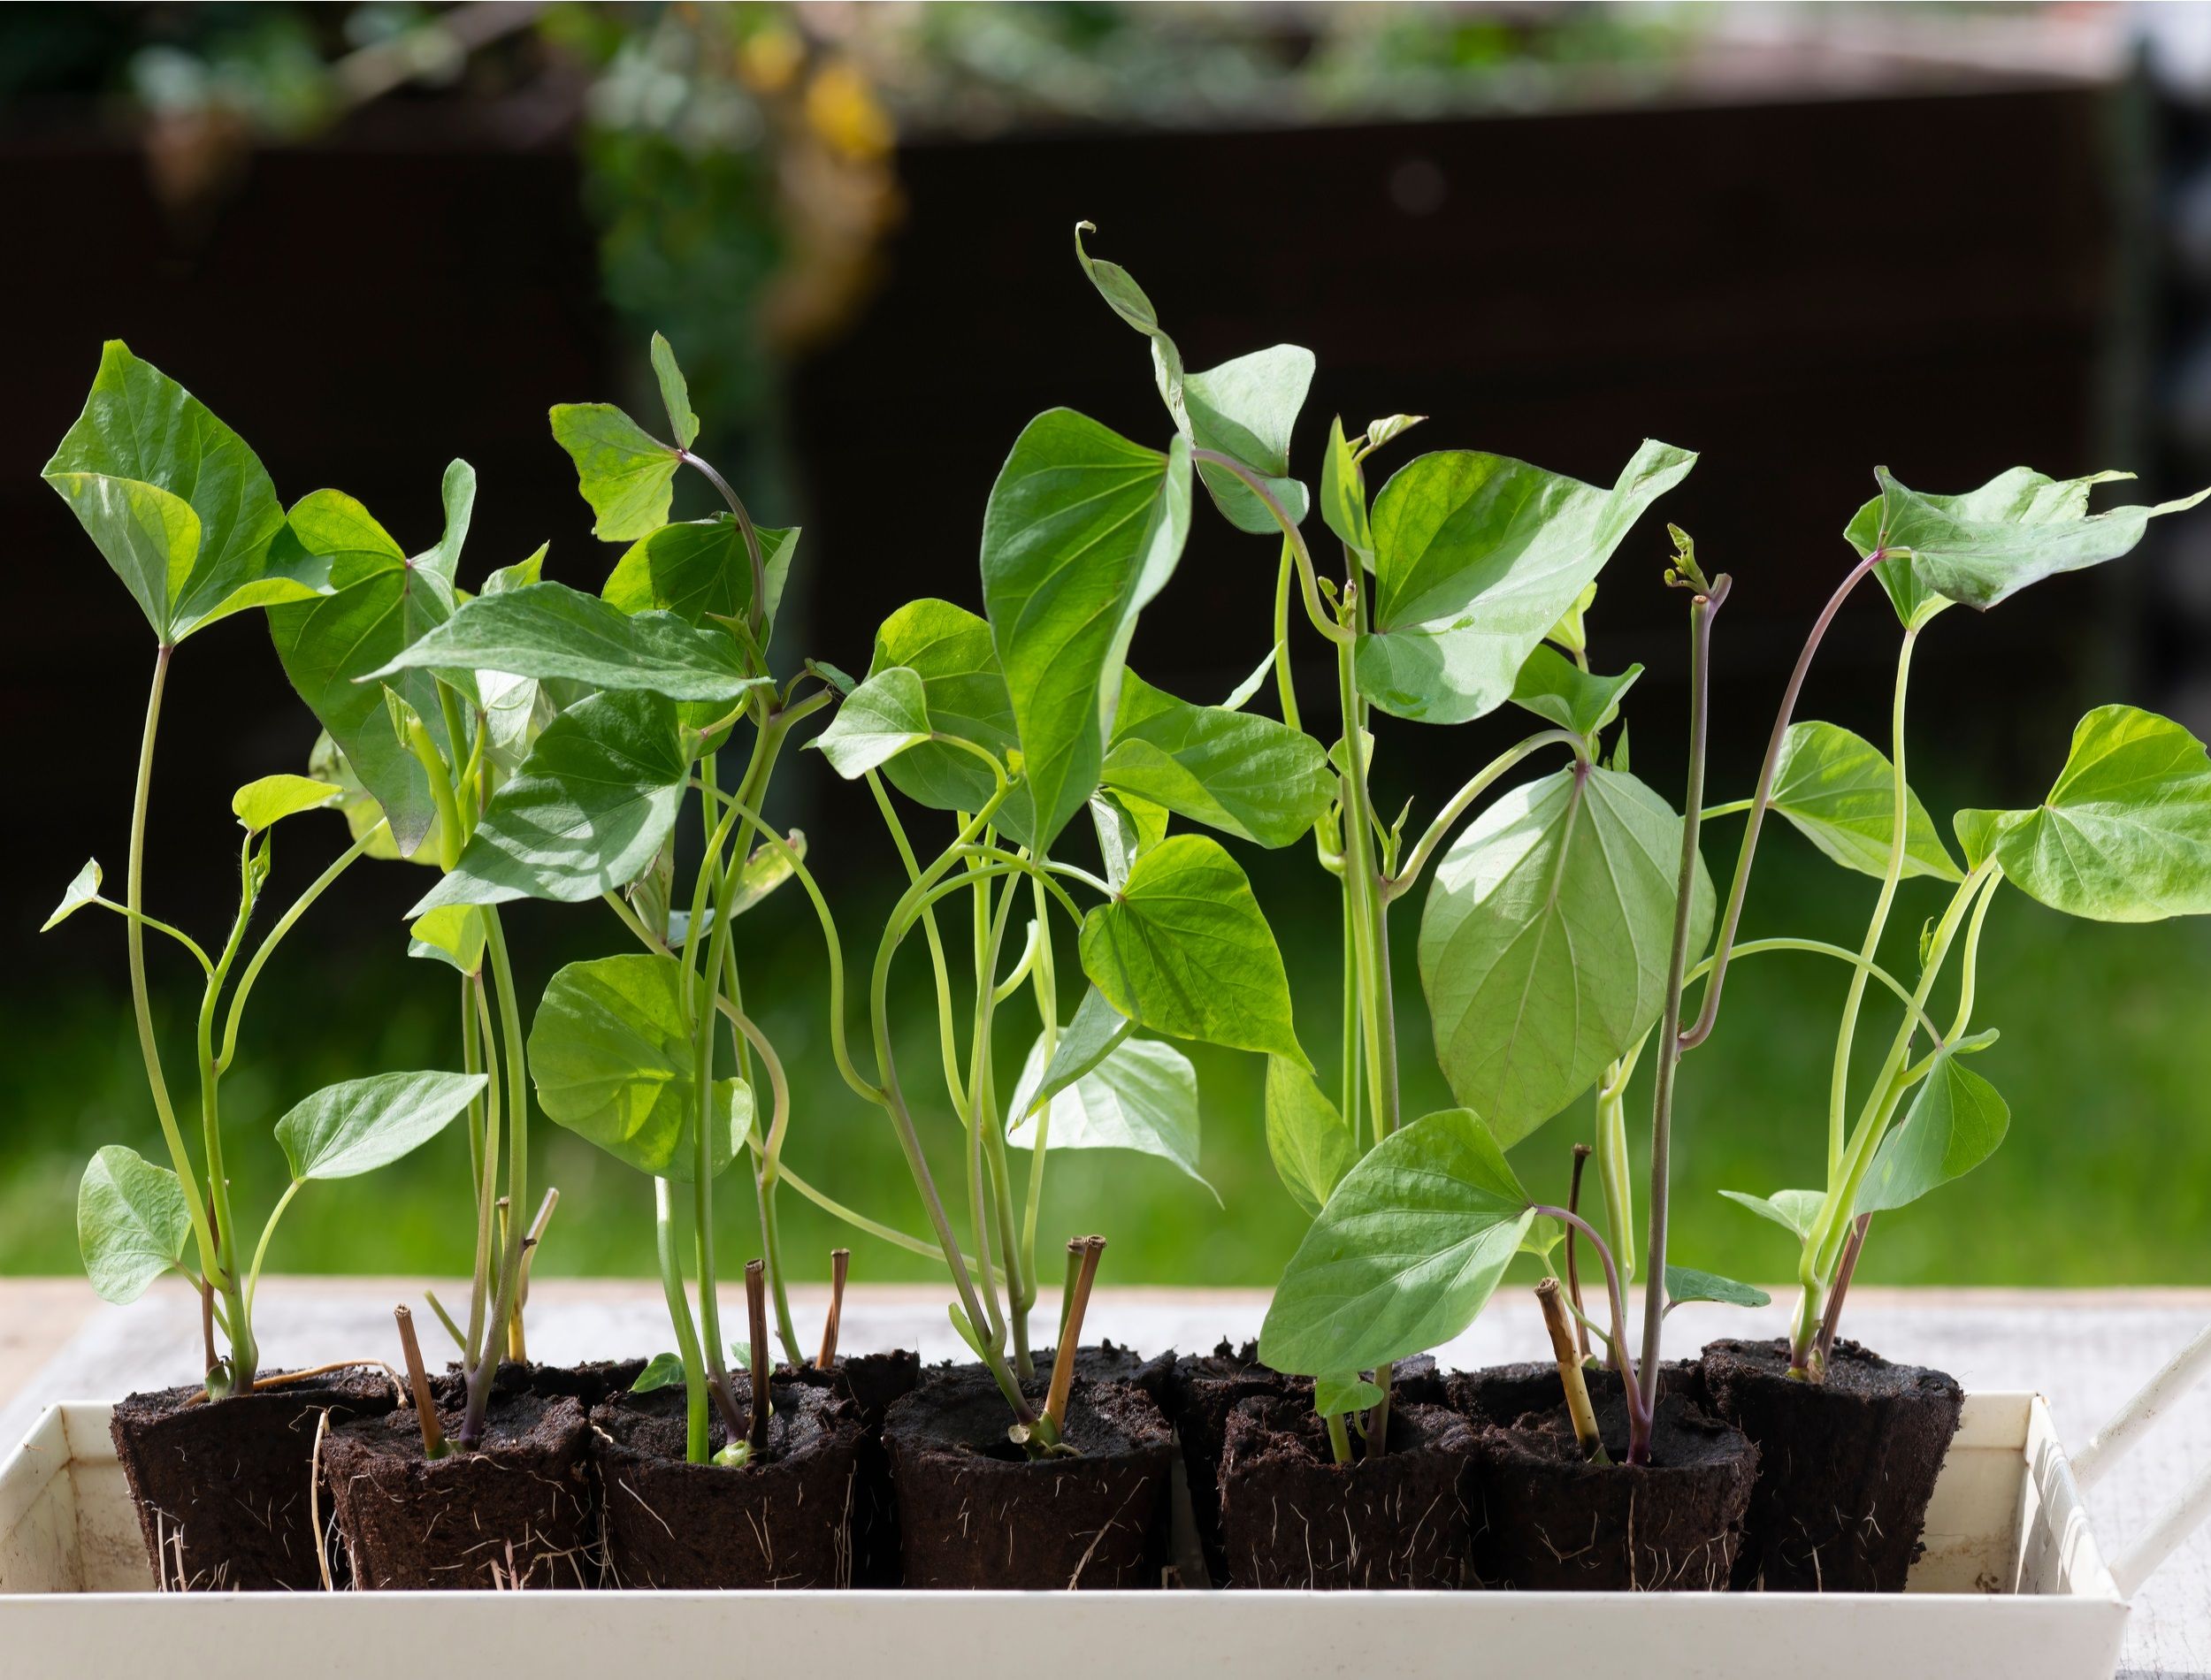 a group of rooted sprouting sweet potato slips, a dicotyledonous plant Convolvulaceae related to the bindweed or morning glory family, gardening background copy space above